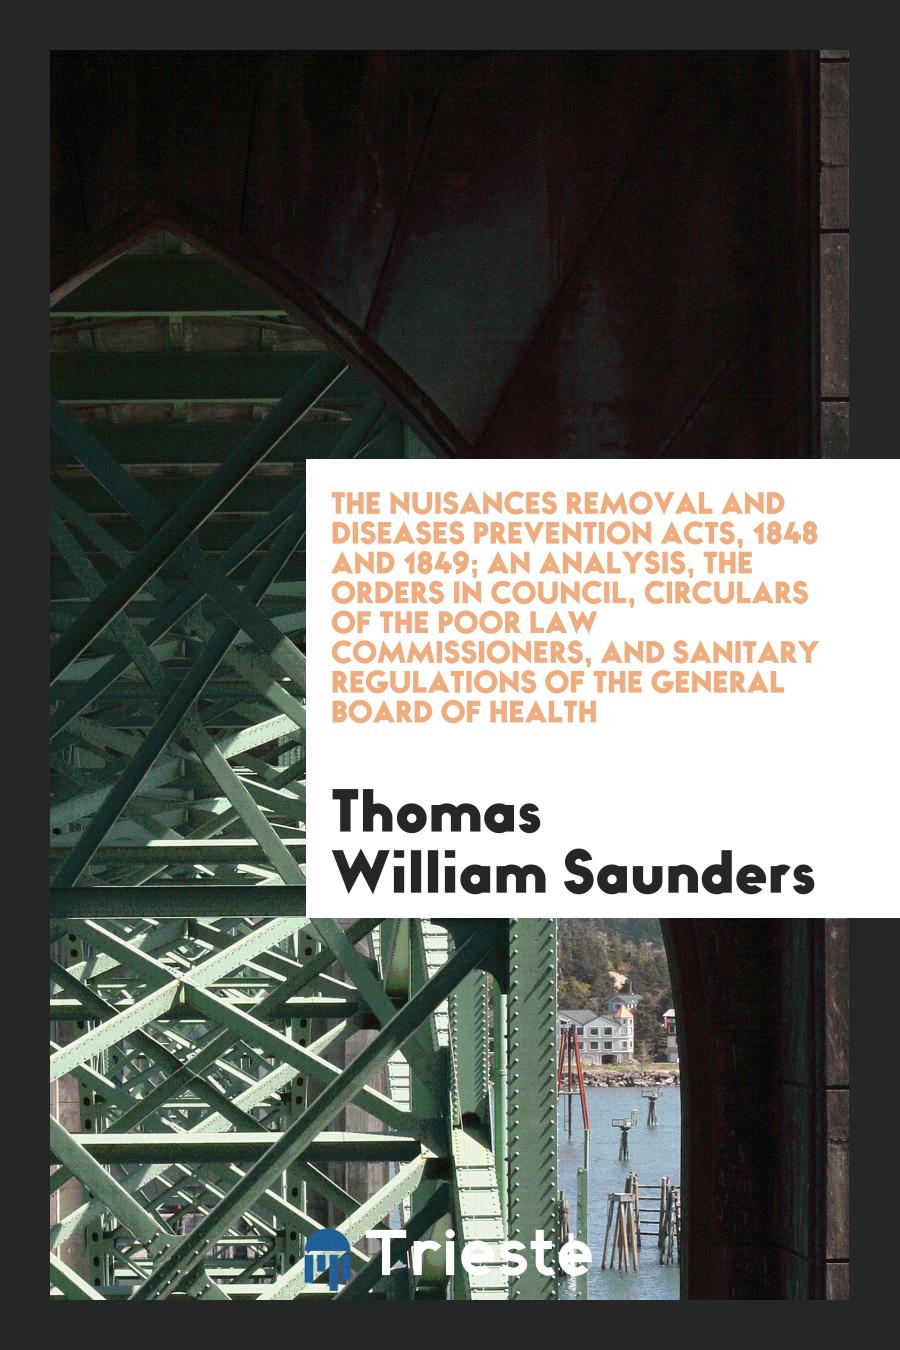 The Nuisances Removal and Diseases Prevention Acts, 1848 and 1849; An Analysis, the Orders in Council, Circulars of the Poor Law Commissioners, and Sanitary Regulations of the General Board of Health